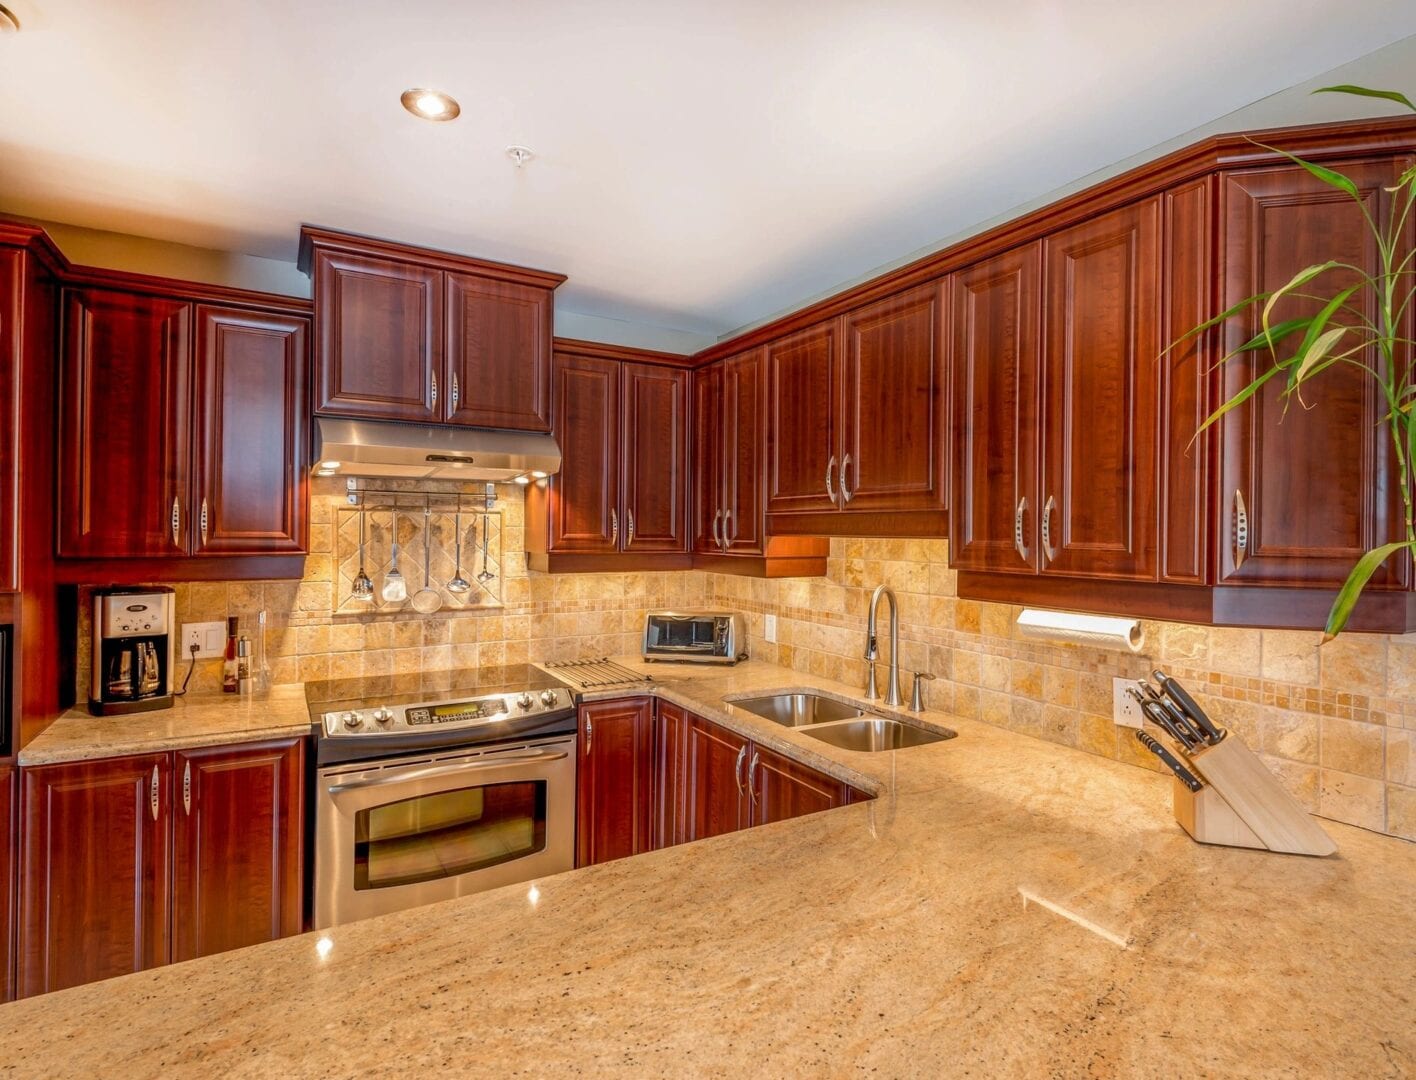 Deluxe Cabinets and Granite